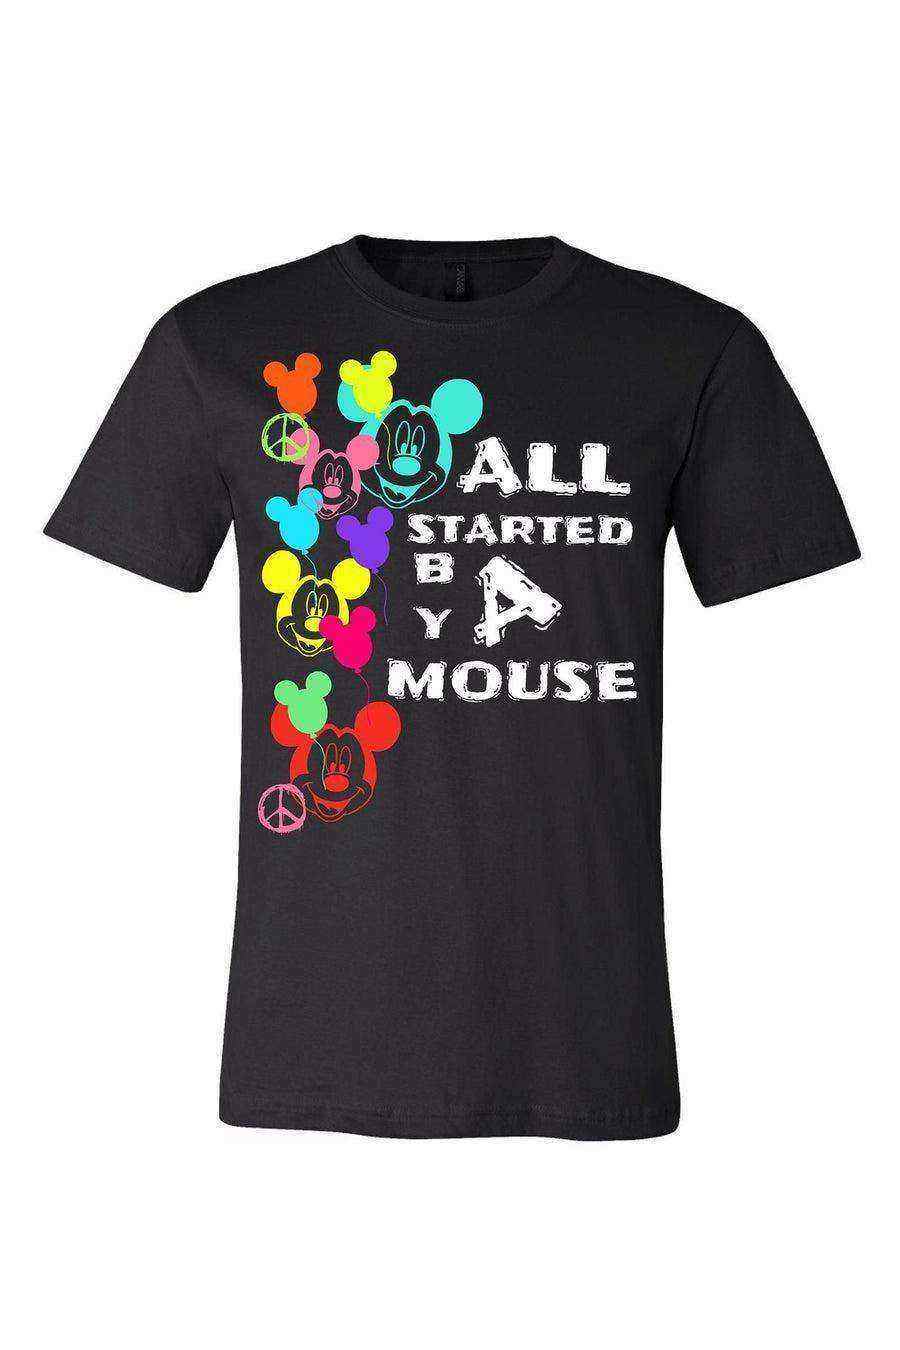 Youth | All Started By A Mouse Shirt | Mickey Balloons Shirt - Dylan's Tees